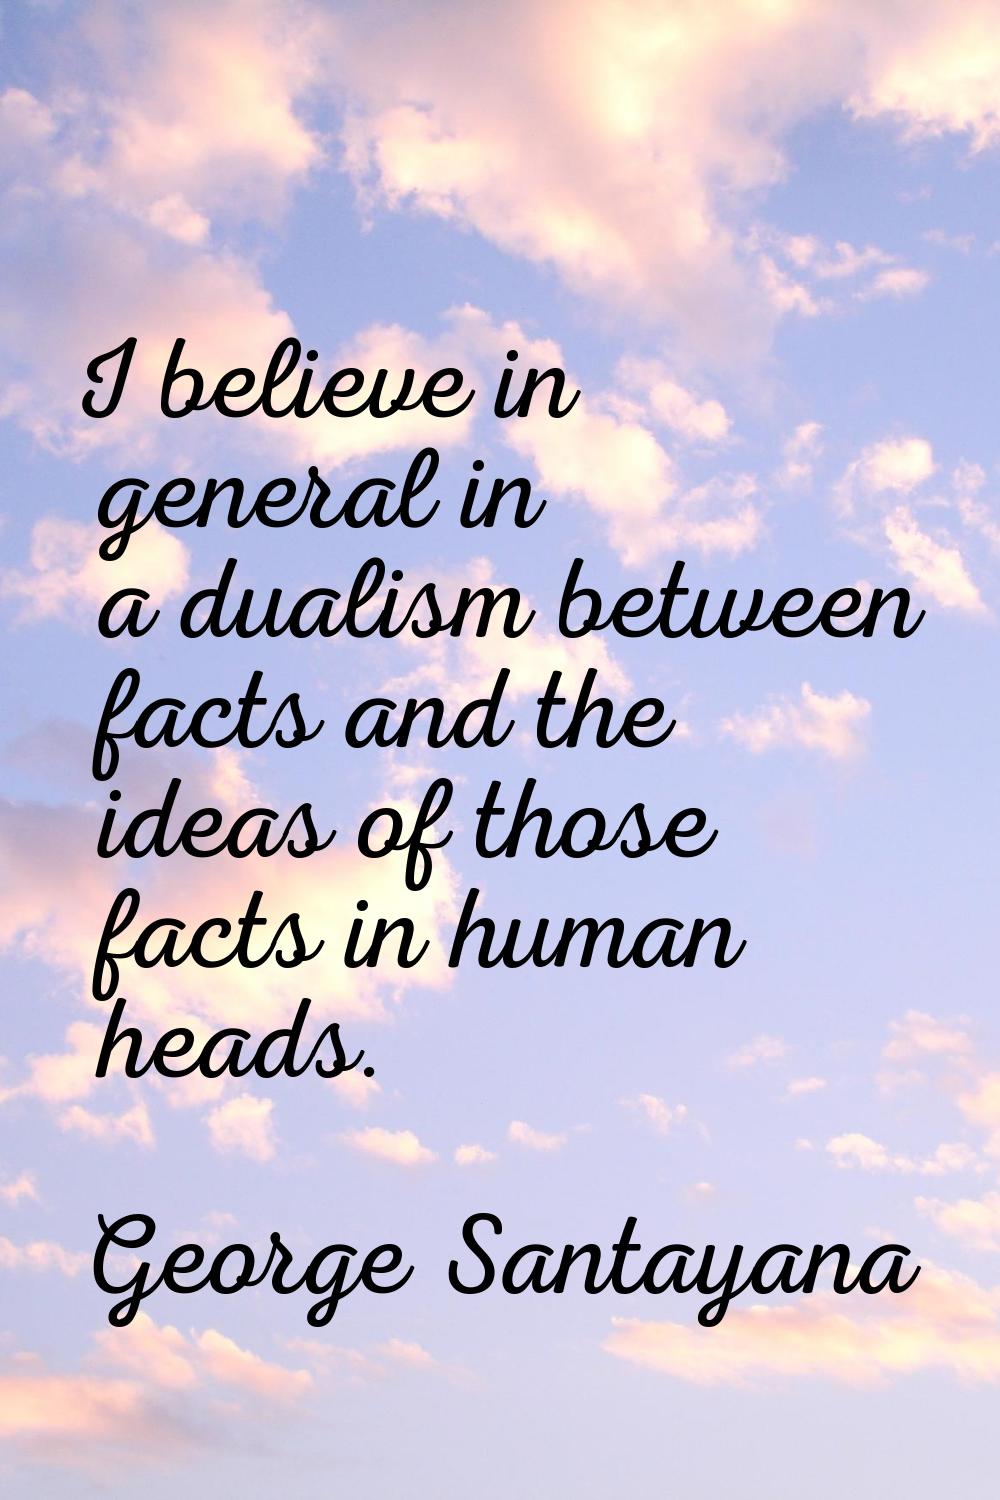 I believe in general in a dualism between facts and the ideas of those facts in human heads.